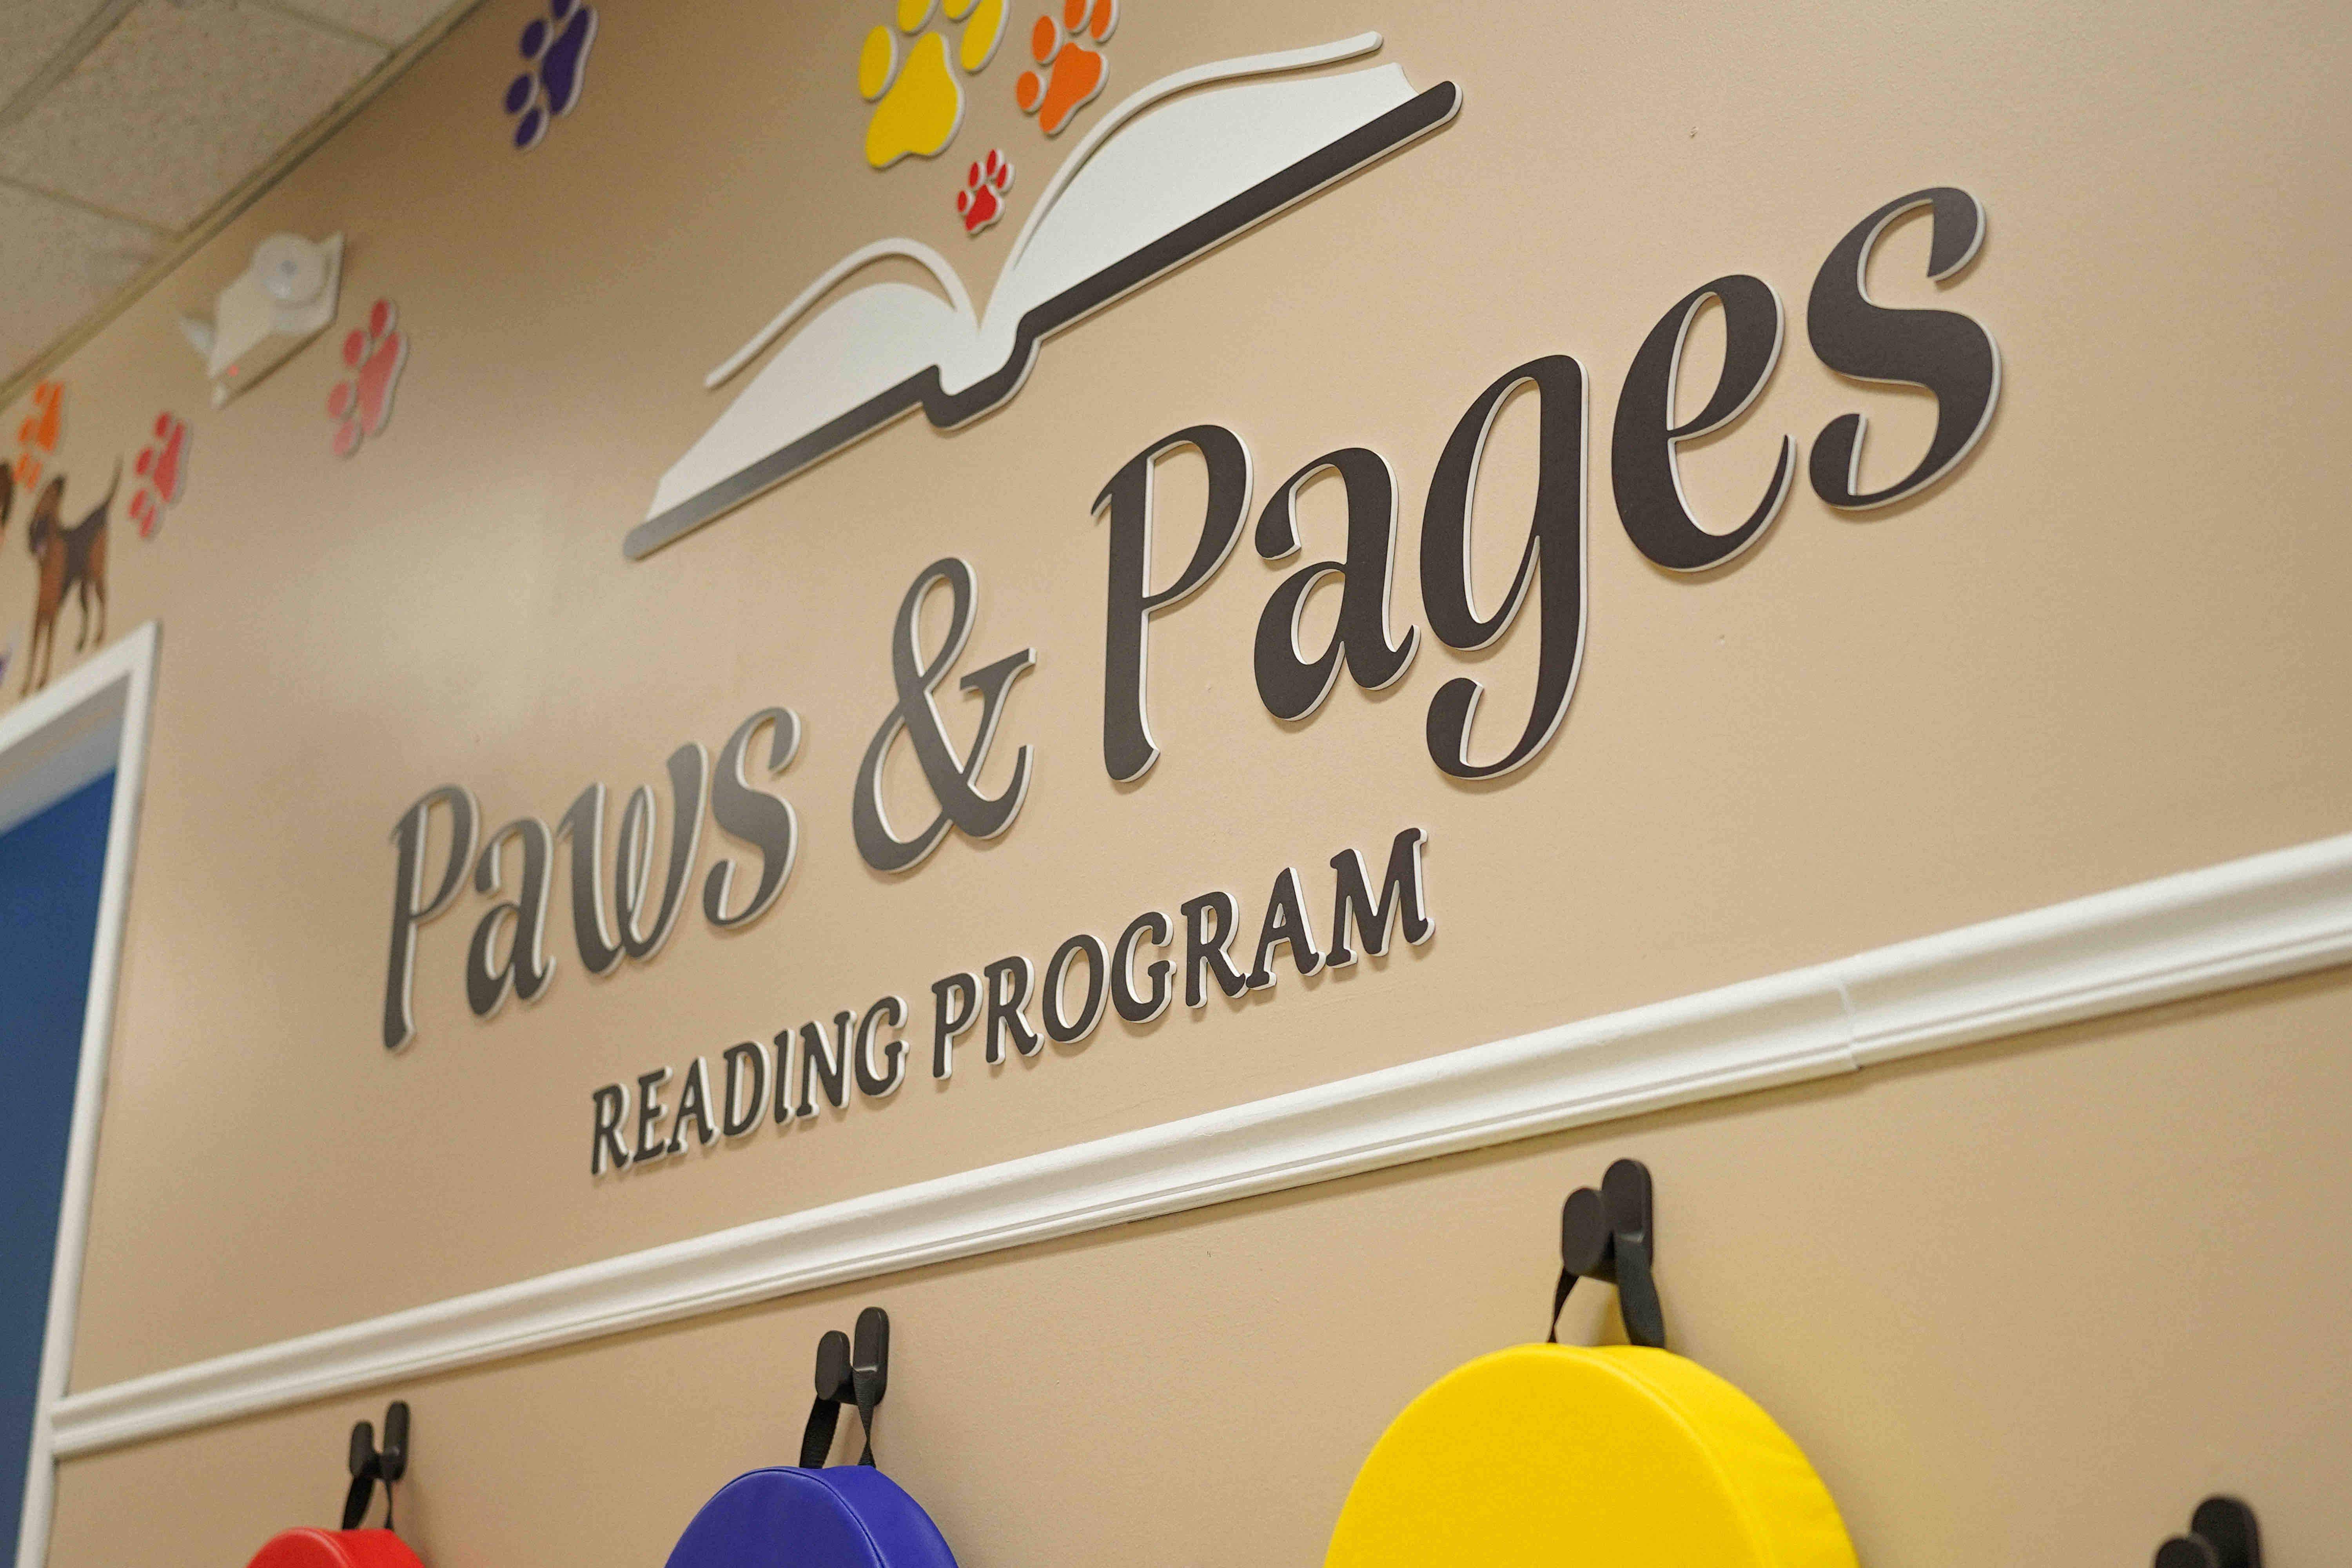 Paws & Pages Reading Program